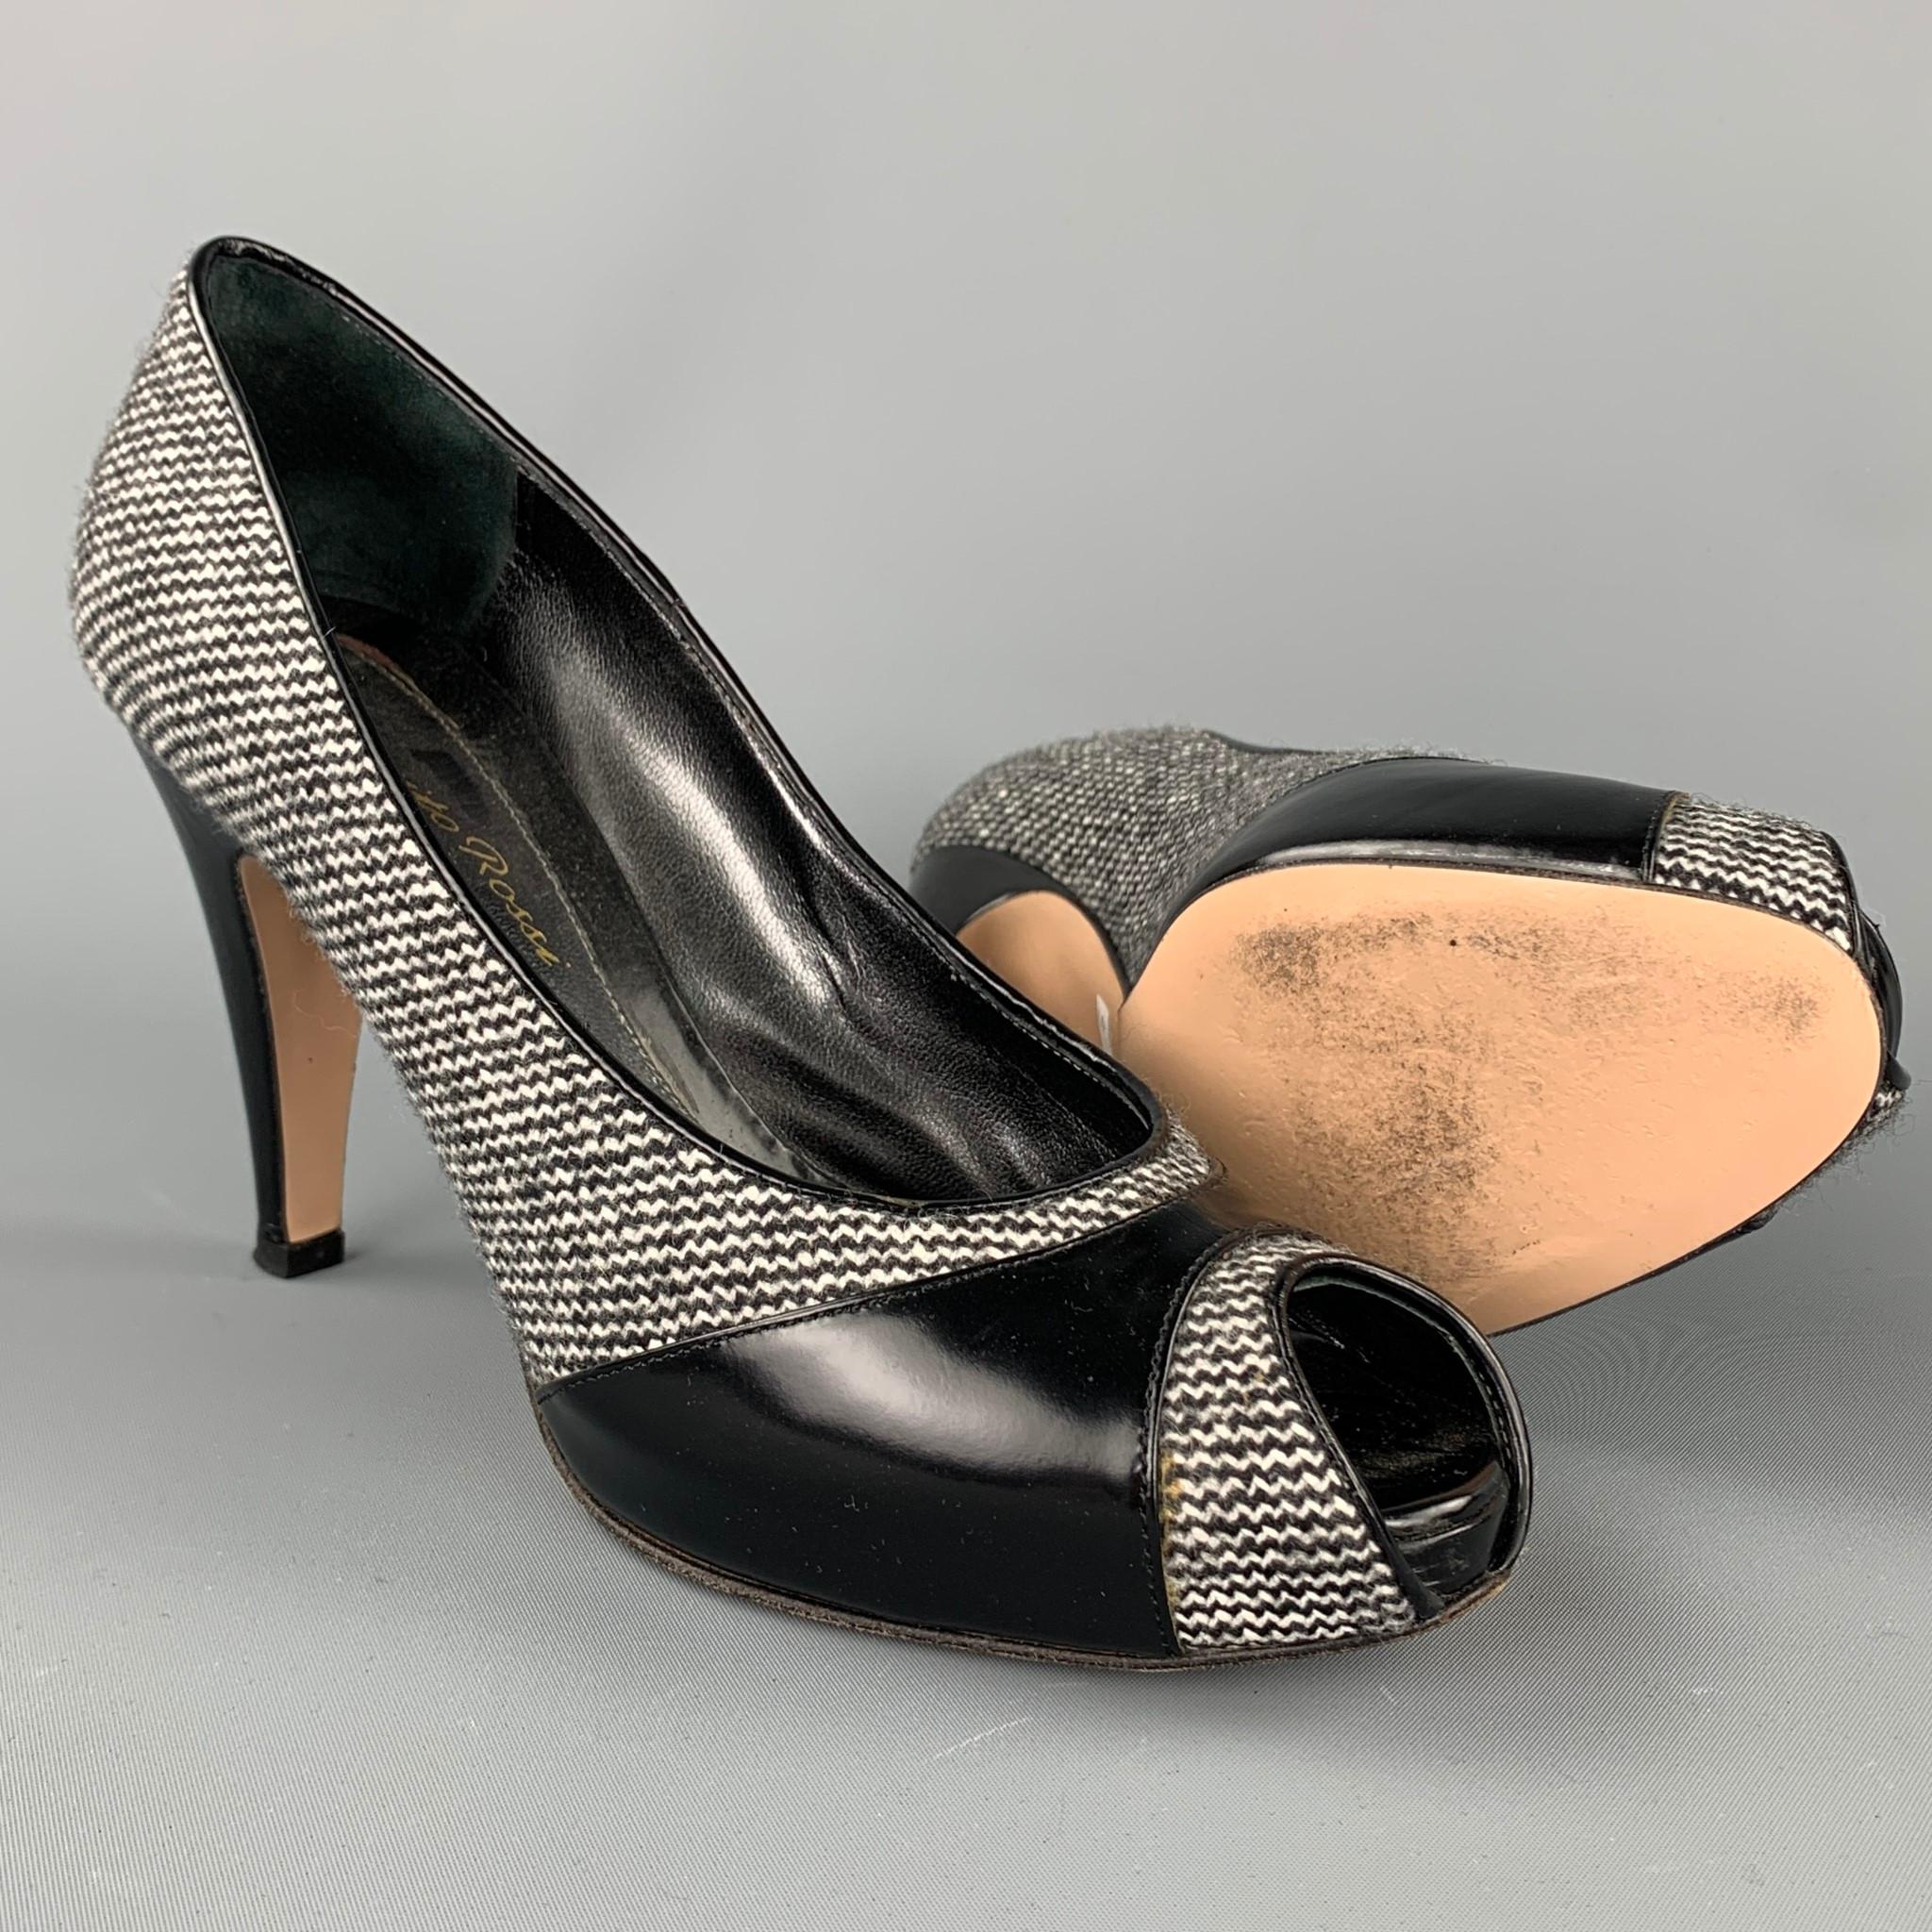 Black GIANVITO ROSSI Size 7 Grey Tweed Patent Leather Tweed Open Toe Pumps